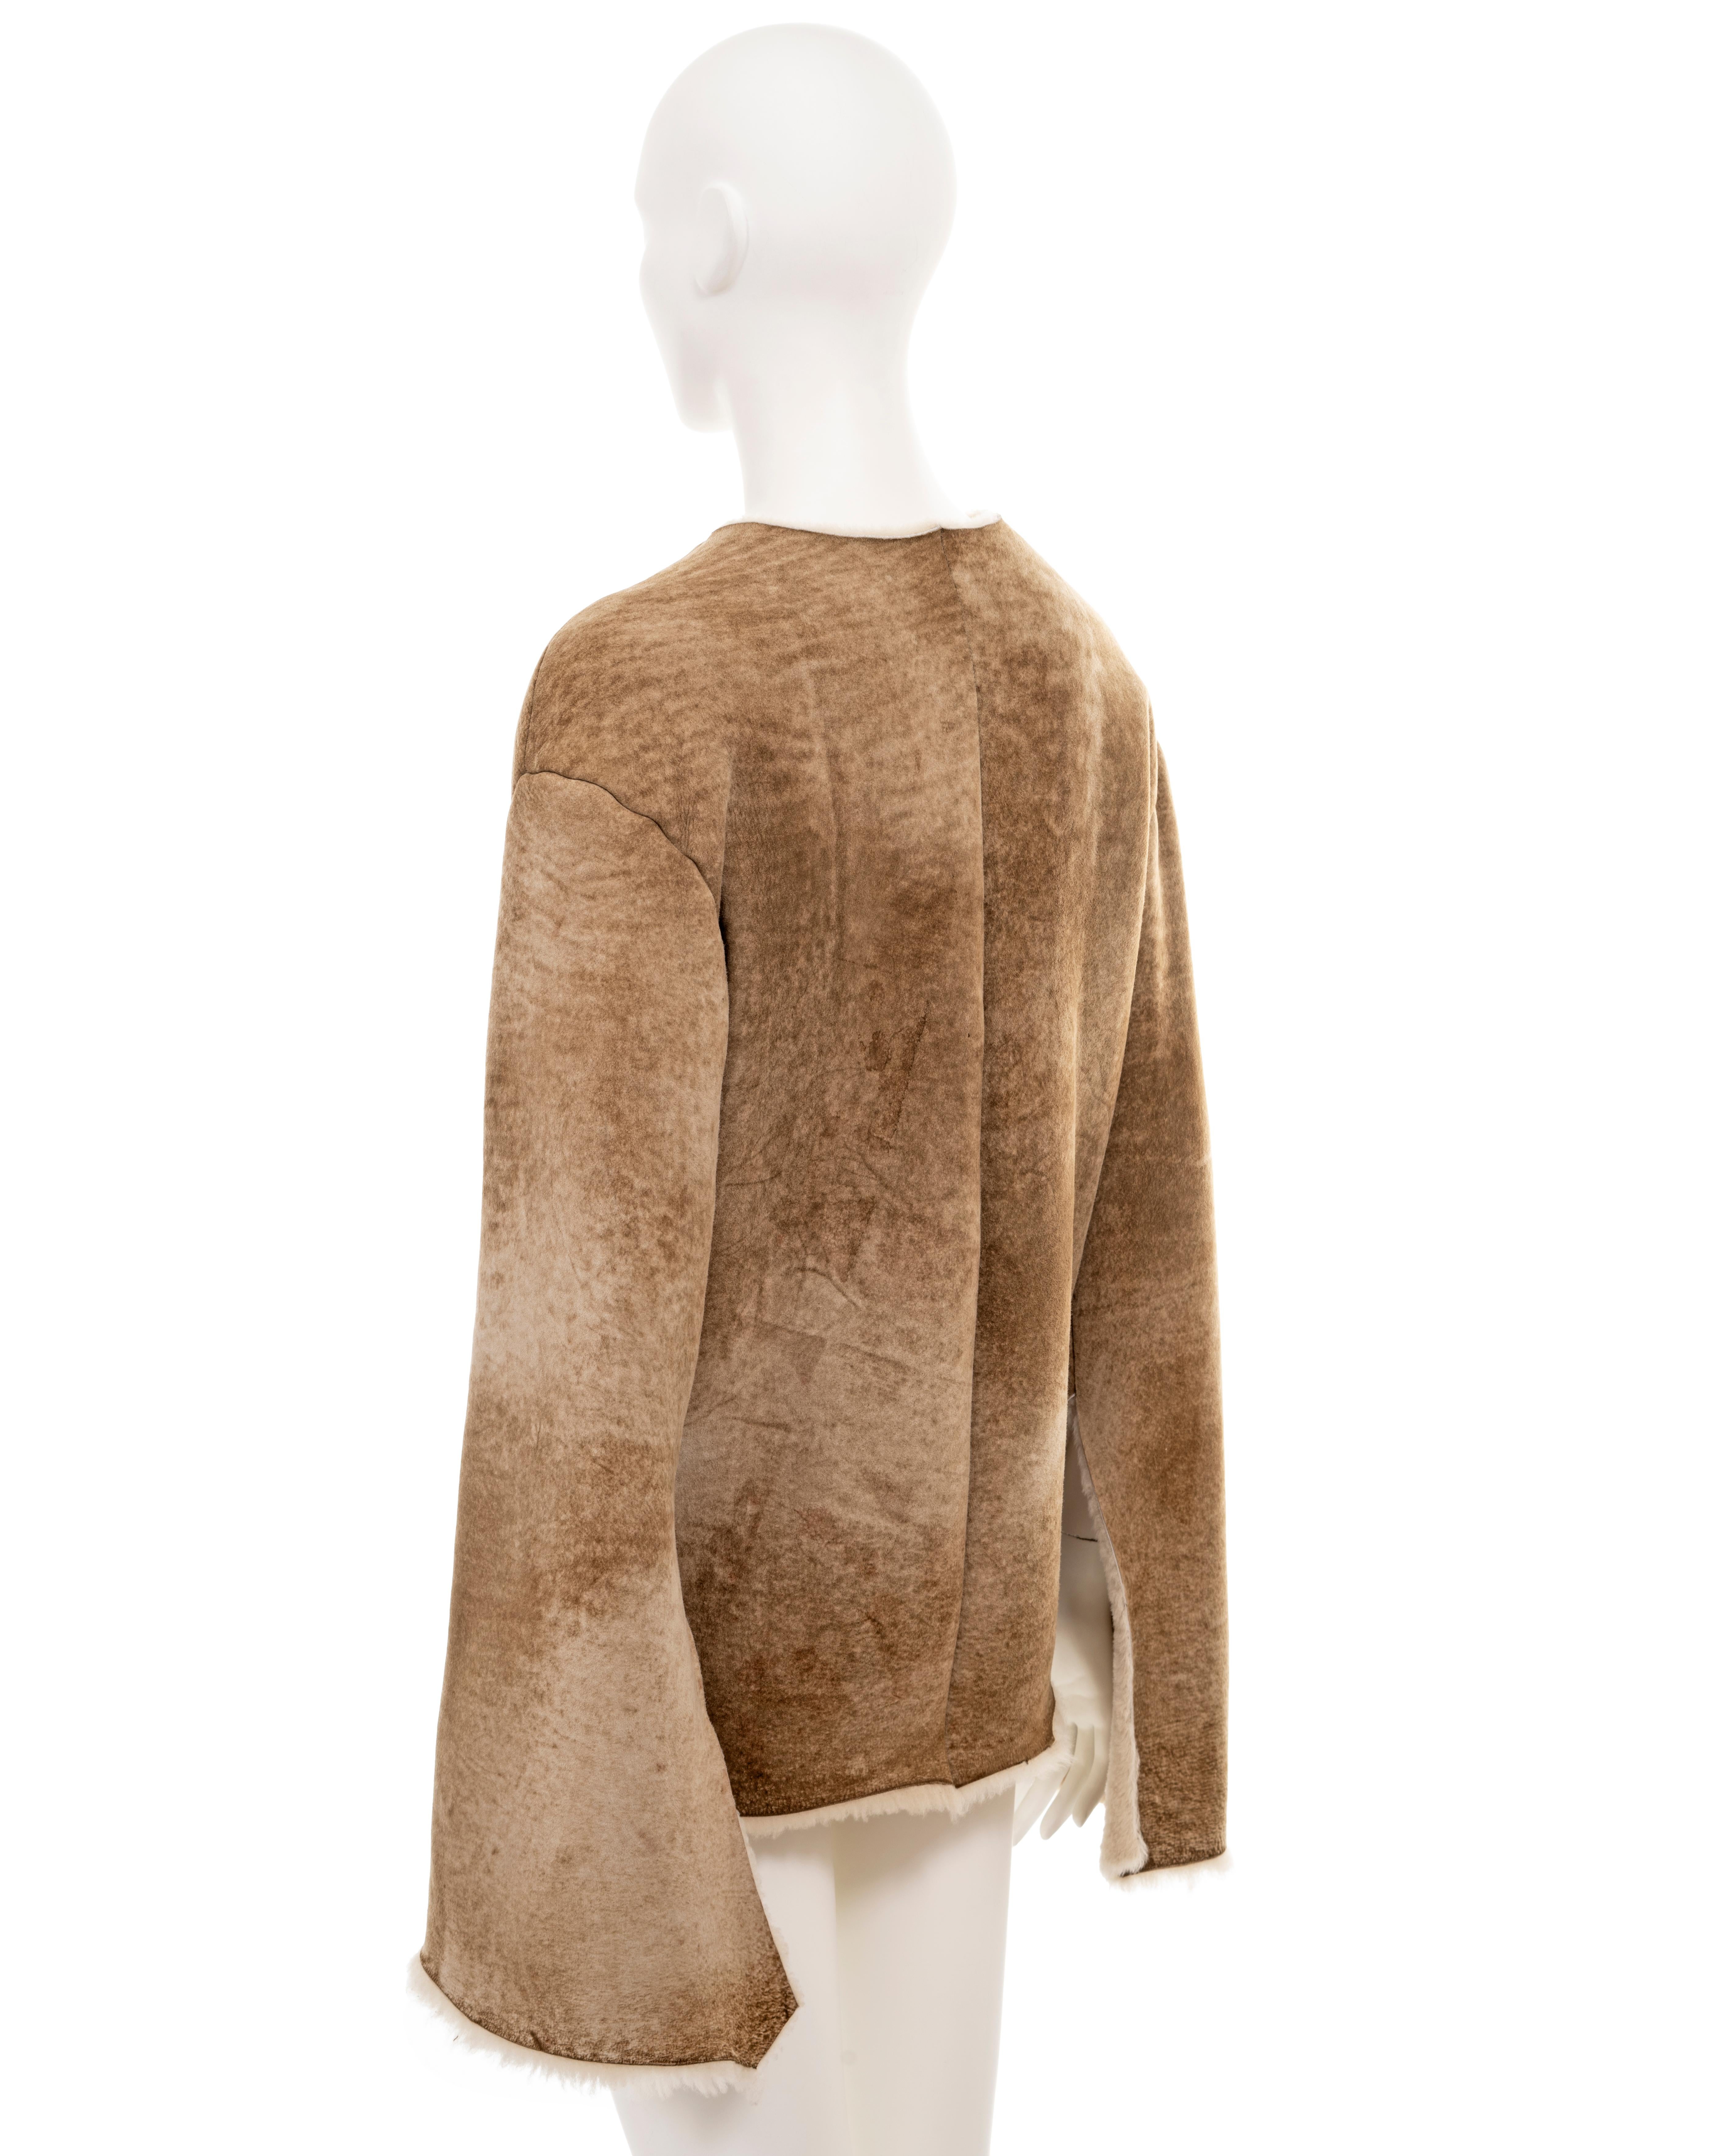 Ruffo Research by A.F. Vandevorst shearling pullover sweater, fw 2000 For Sale 4